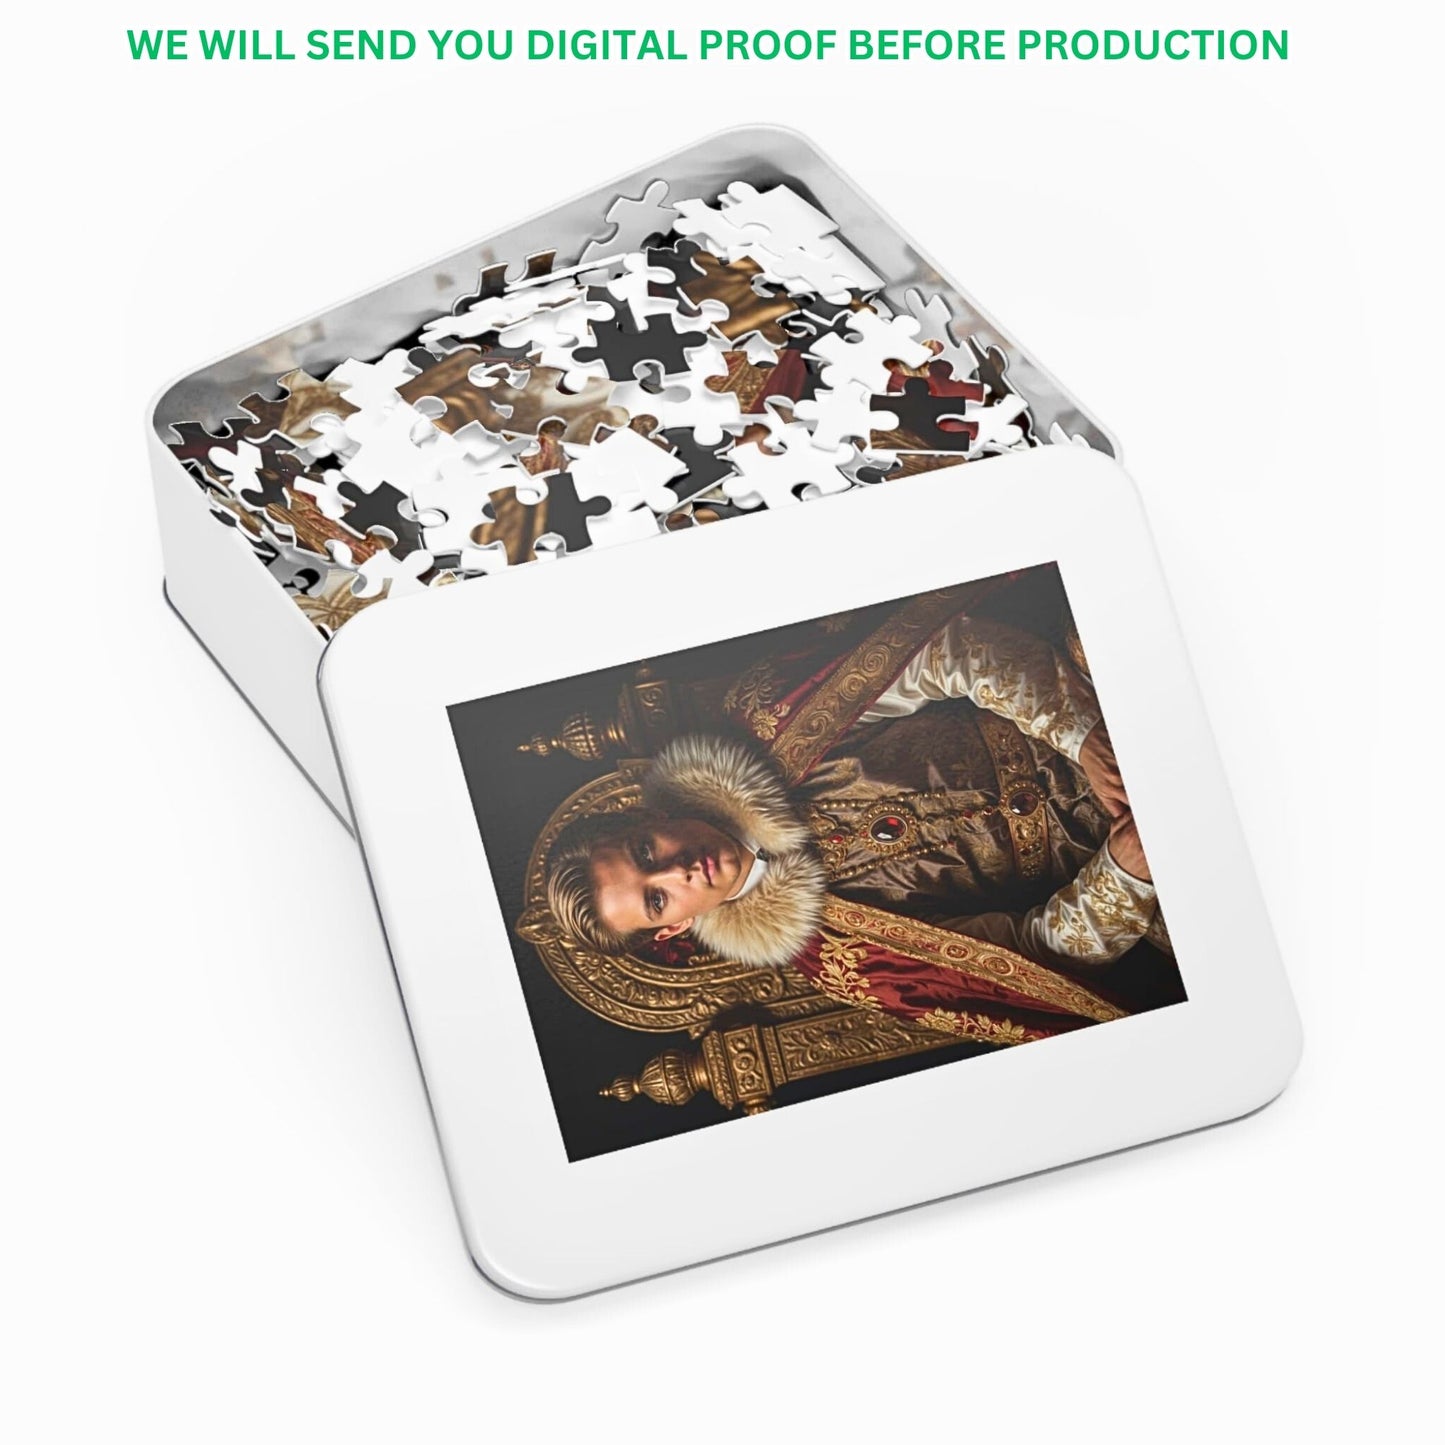 Unlock creativity with custom puzzles! Turn your photos into Royal King Puzzles, Renaissance Puzzles, and Historical Puzzles. Perfect for birthdays, anniversaries, and holidays. Unique gifts for friends, men, dads, and husbands. Custom puzzles that merge tradition with modern artistry.